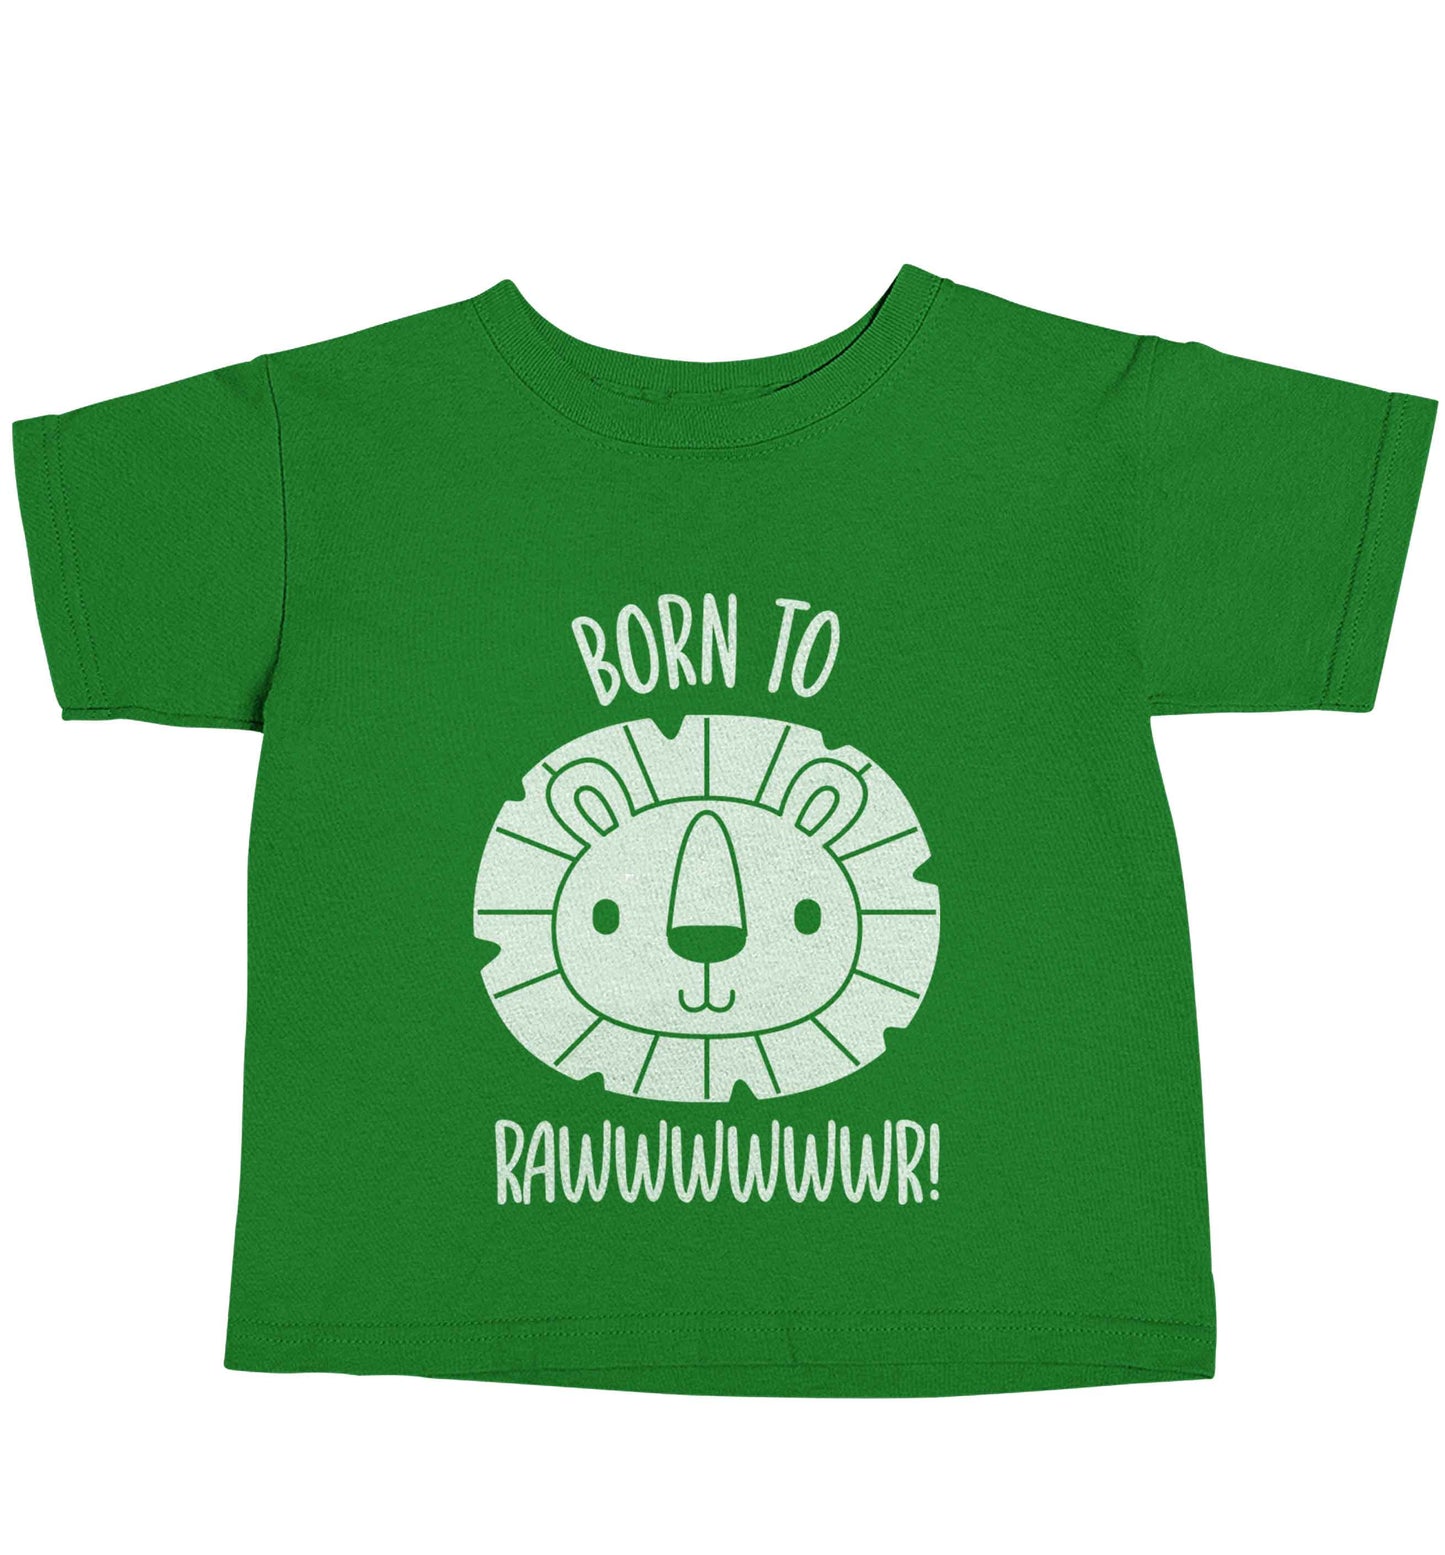 Born to rawr green baby toddler Tshirt 2 Years